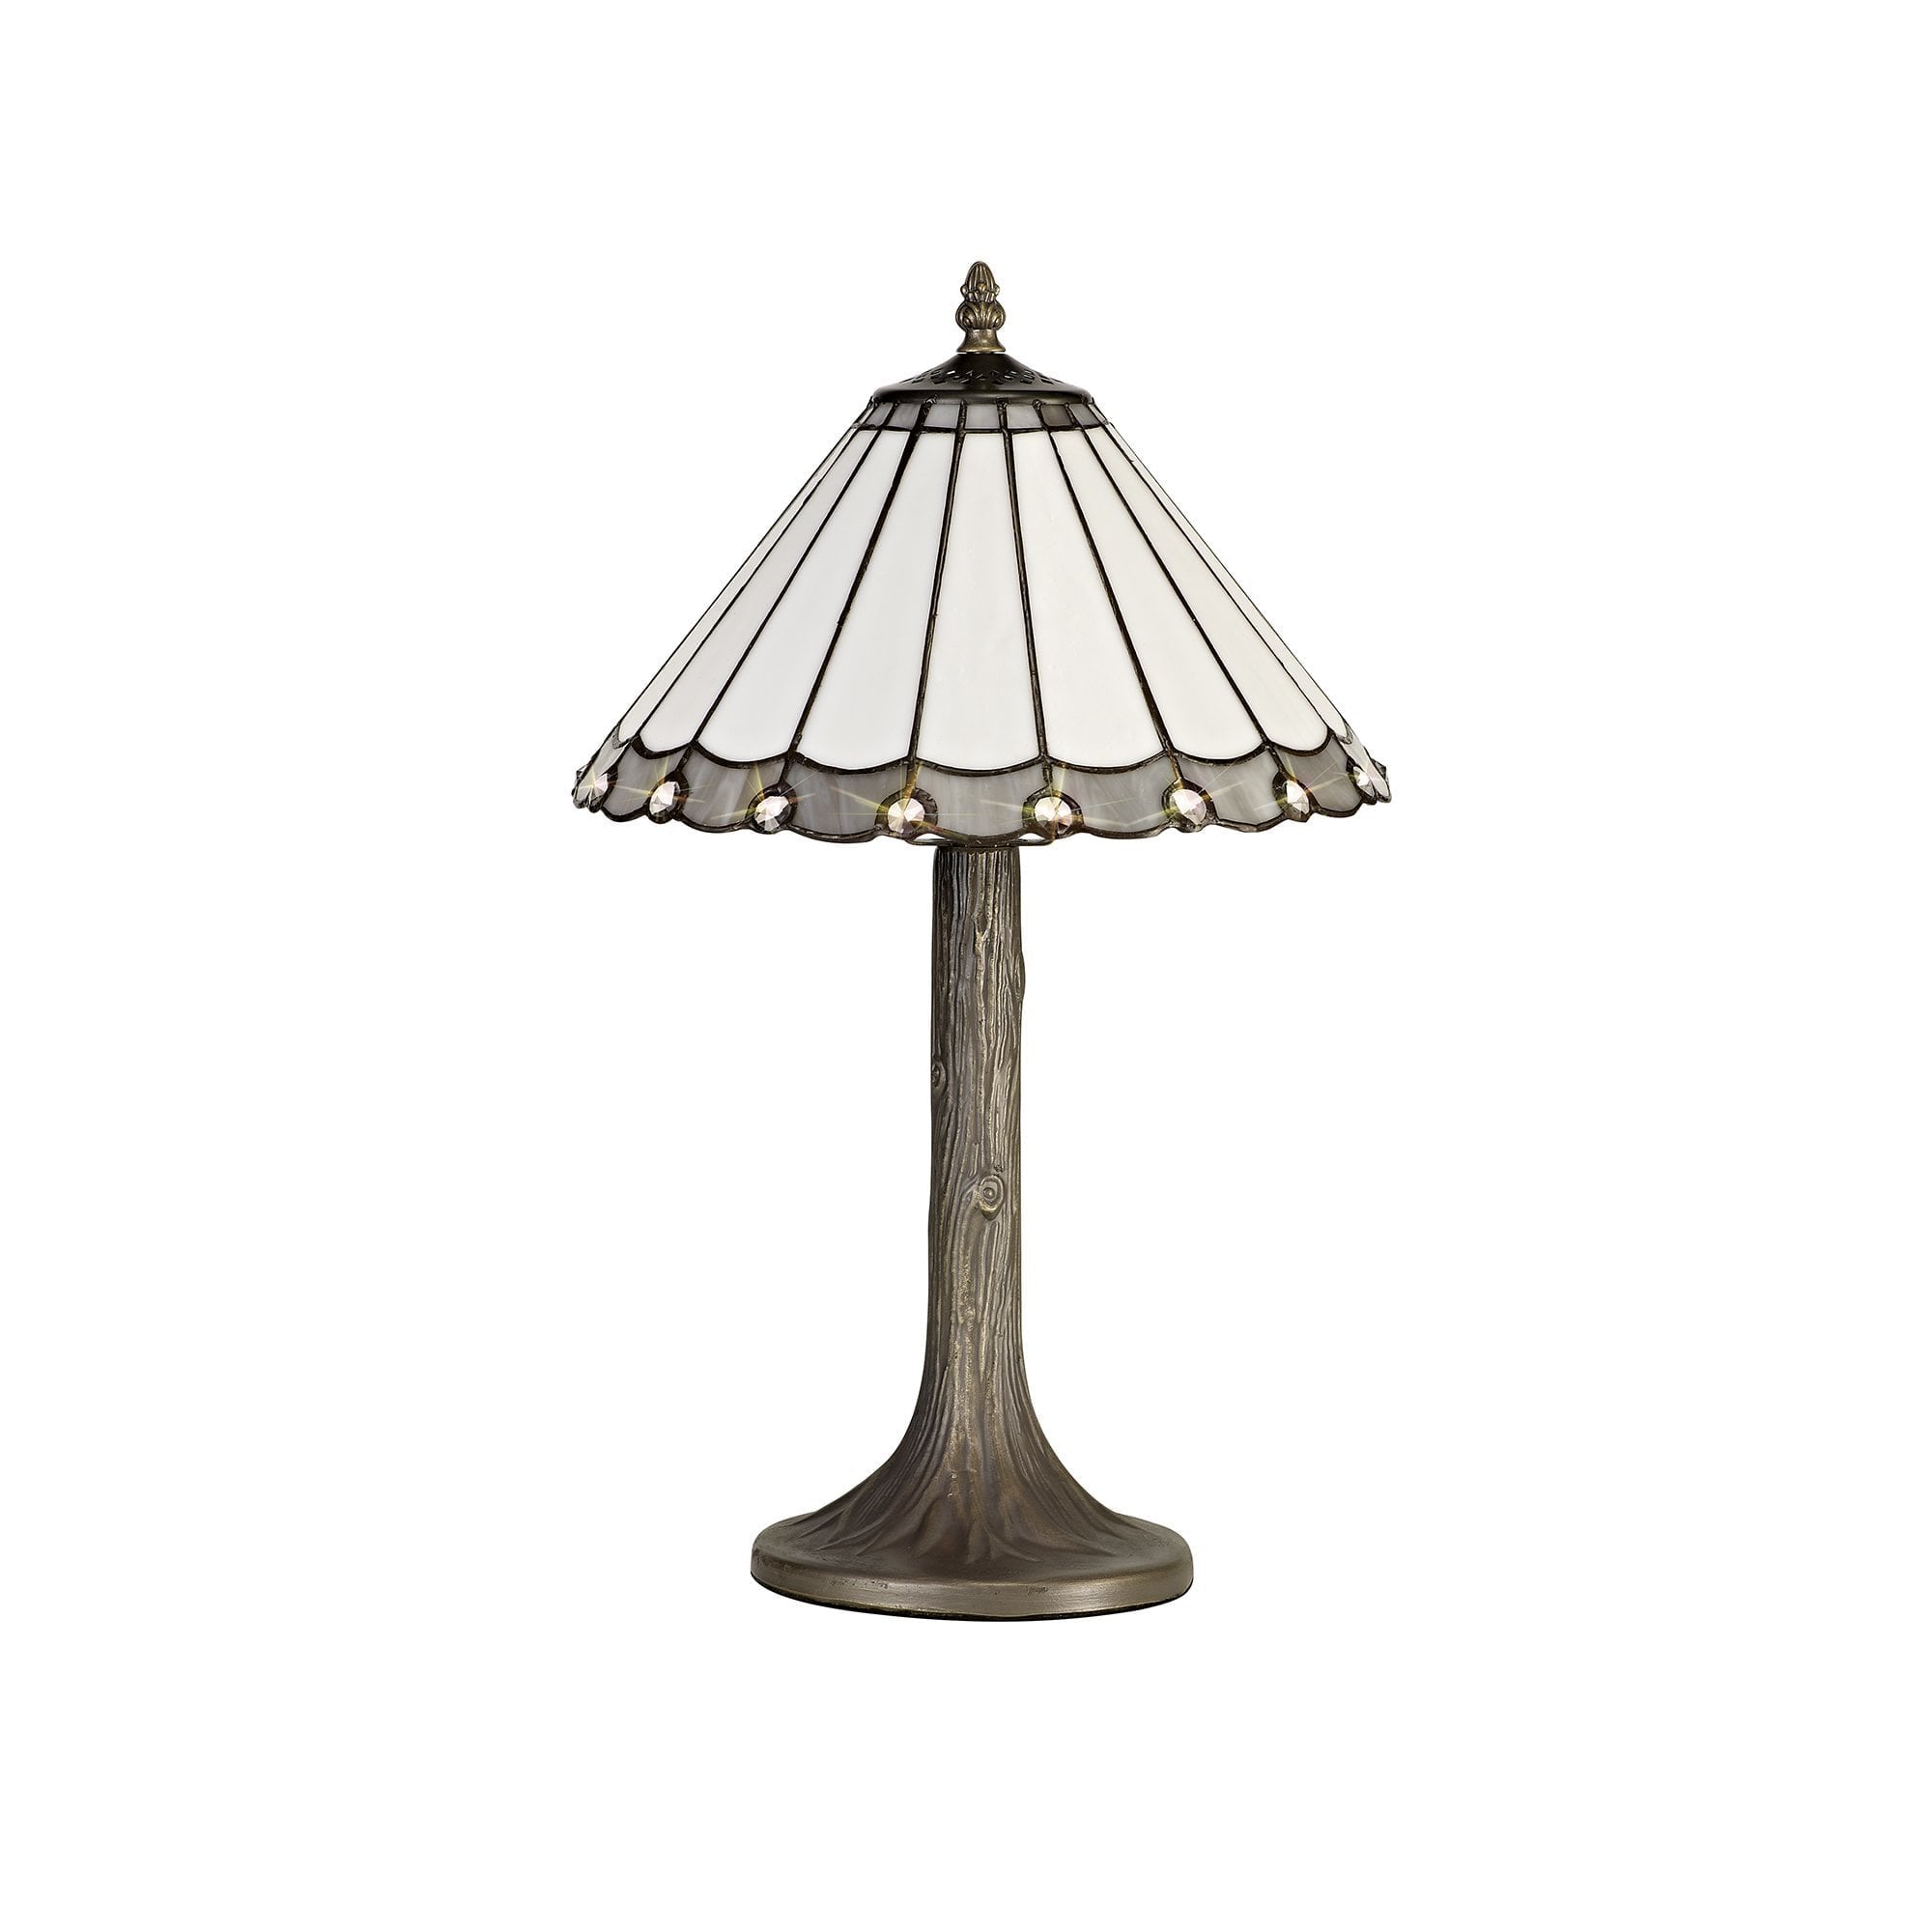 1 Light Tree Like Table Lamp E27 With 30cm Tiffany Shade, Grey/Cream/Crystal/Aged Antique Brass